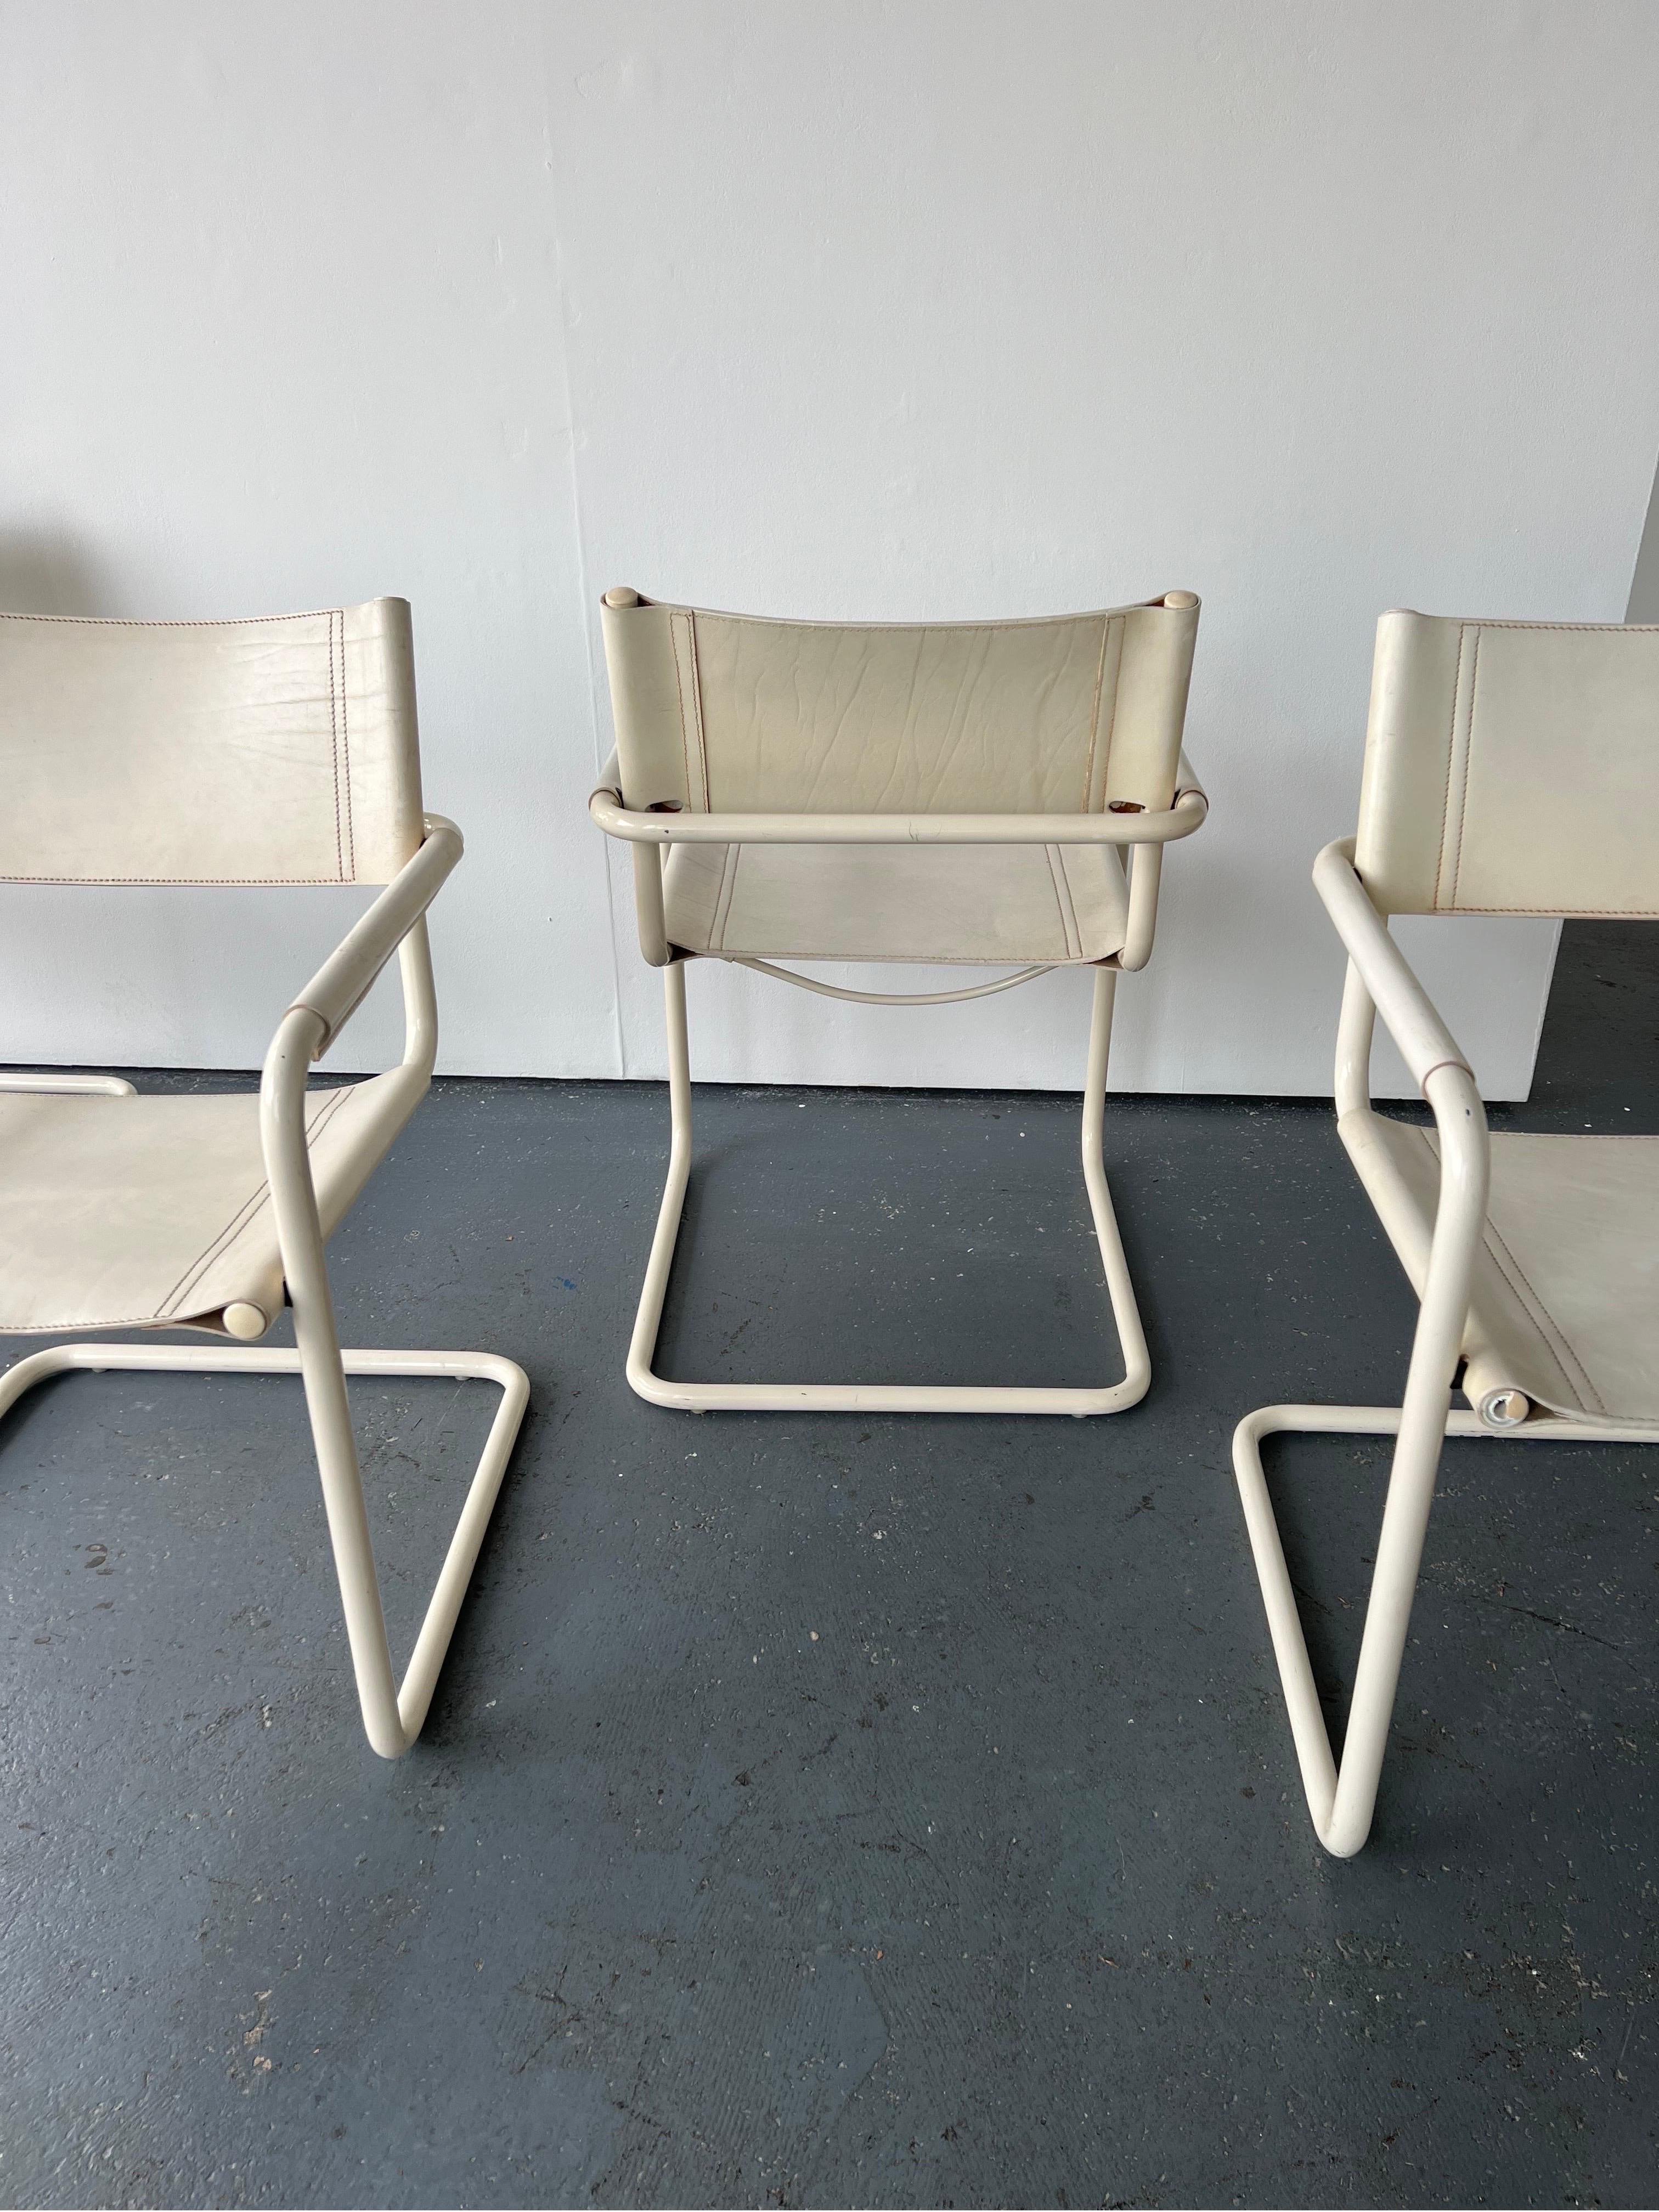 Set of 4 Cantilevered MG5 Dining Chairs Designed by Breuer Made by Matteo Grassi 3